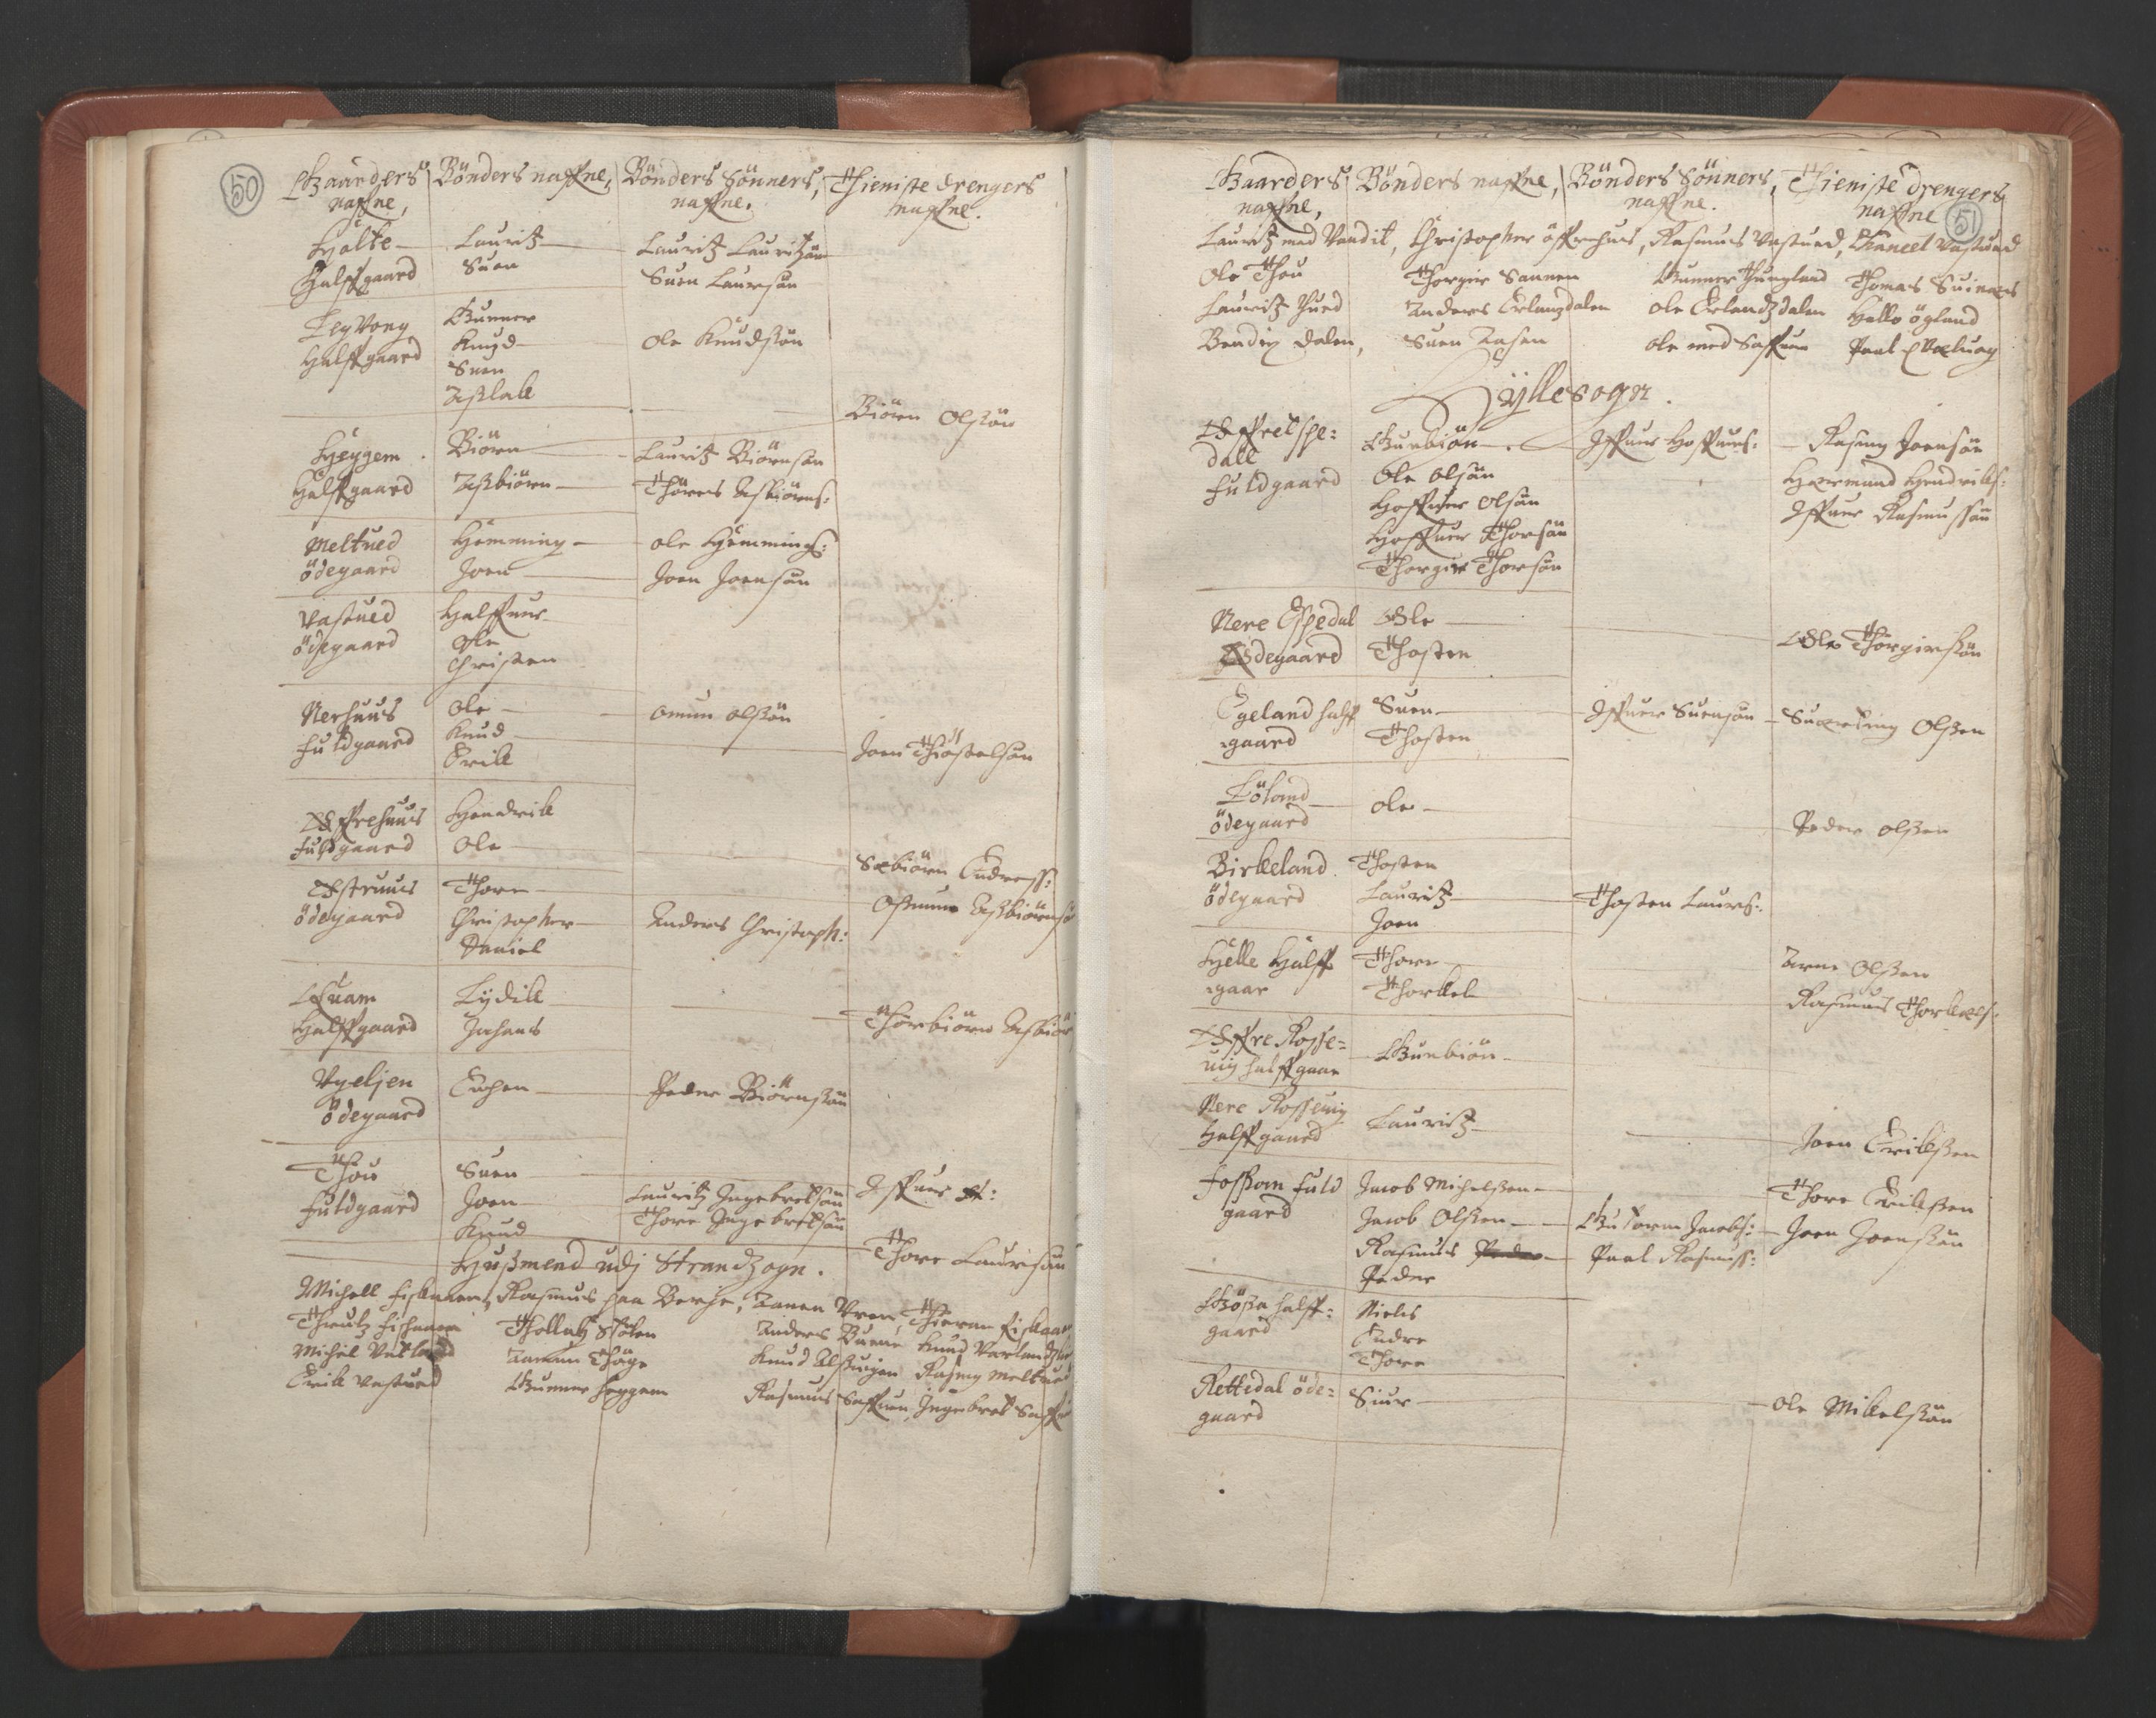 RA, Vicar's Census 1664-1666, no. 18: Stavanger deanery and Karmsund deanery, 1664-1666, p. 50-51